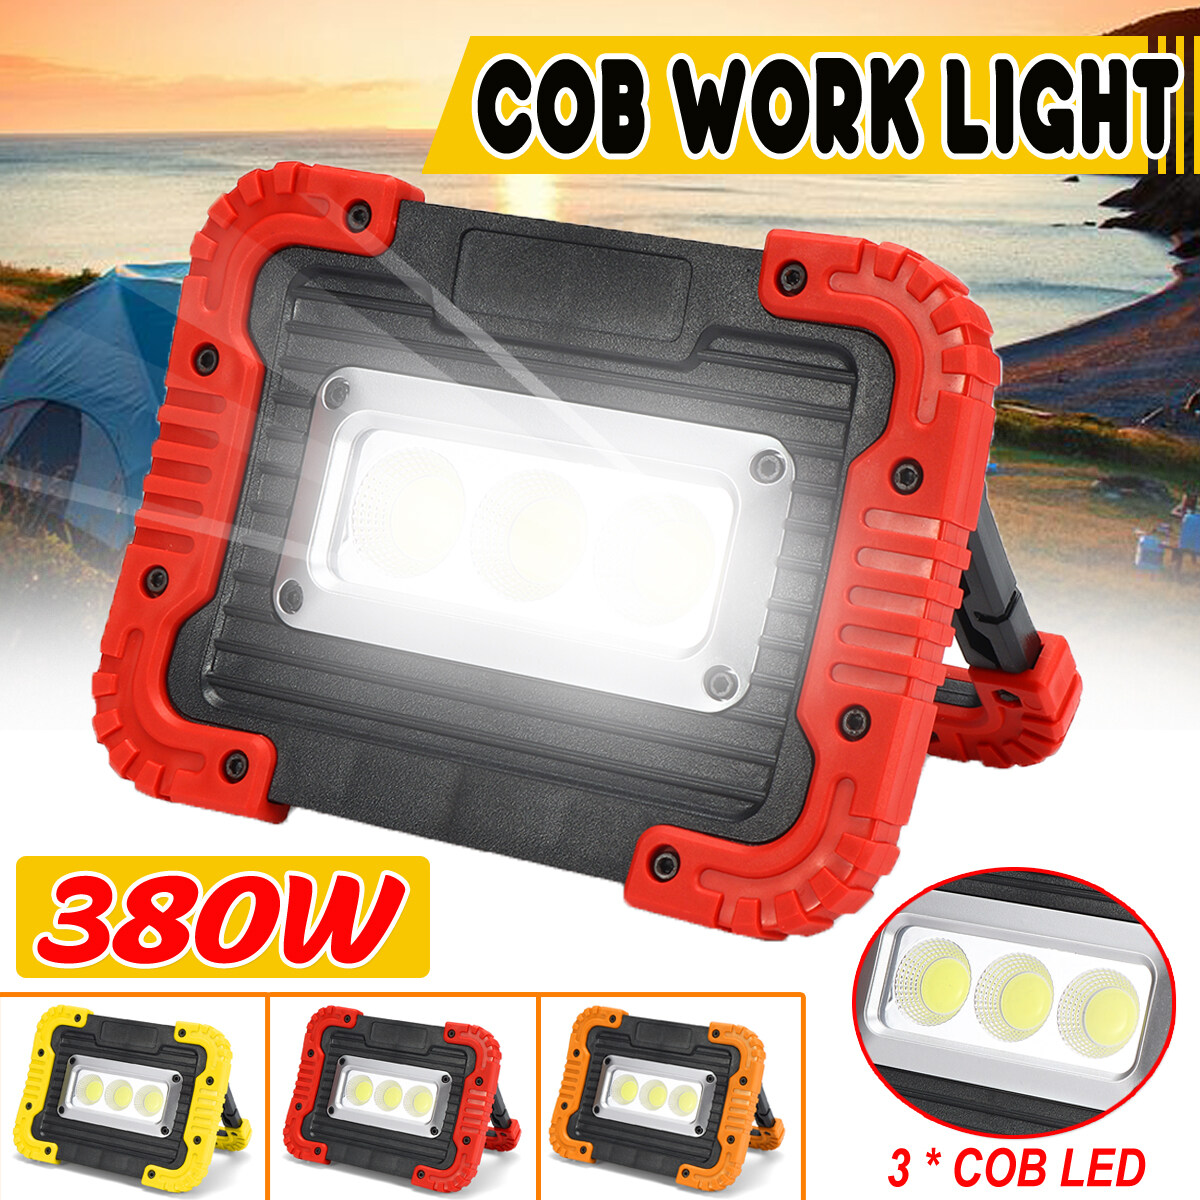 Rechargeable LED COB Work Light Camping Security Floodlight Emergency Lamp UK 